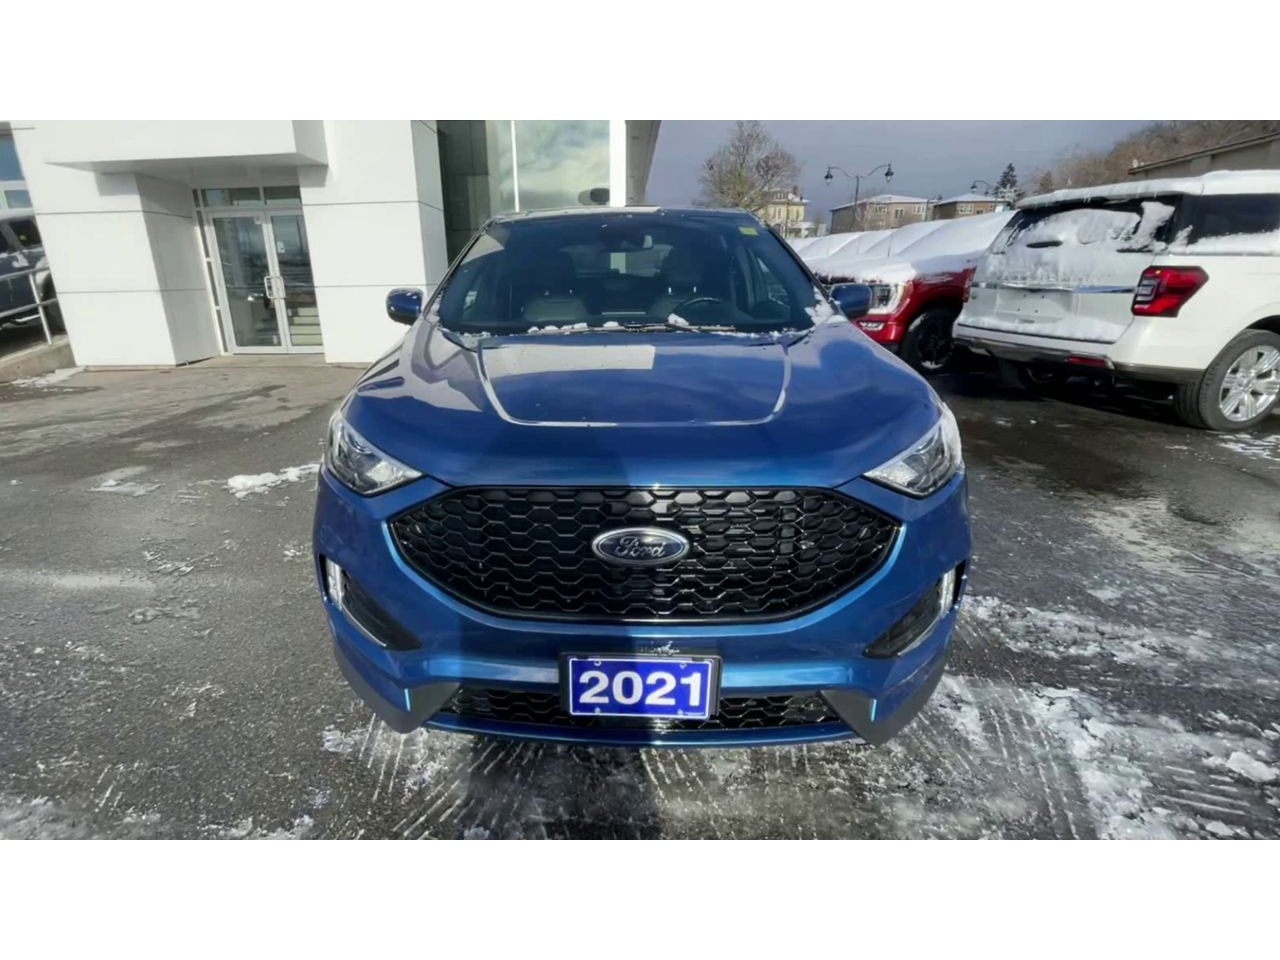 2021 Ford Edge - 21586A Full Image 3